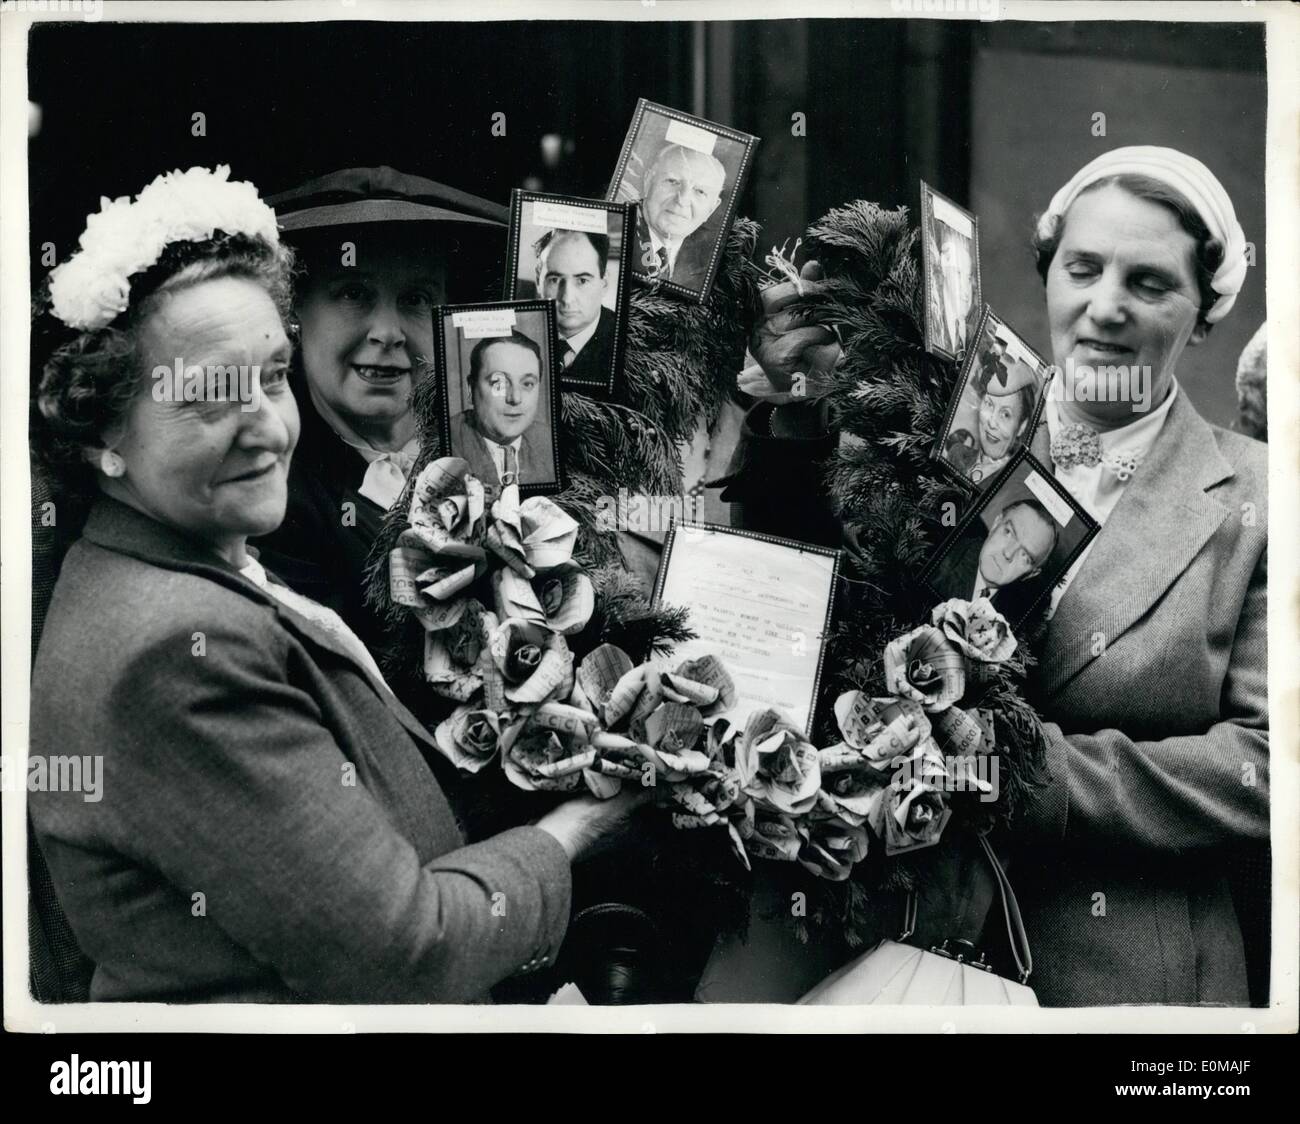 Jul. 02, 1954 - The end of rationing in Britain. Housewives as present the food ministry with a wreath! : With the taking of meat off the ration tomorrow - Saturday - Rationing ends in Britain after fourteen years - so that for the first time since 1940 housewives can purchase whatever they can afford - and the ration books can be burned Stock Photo